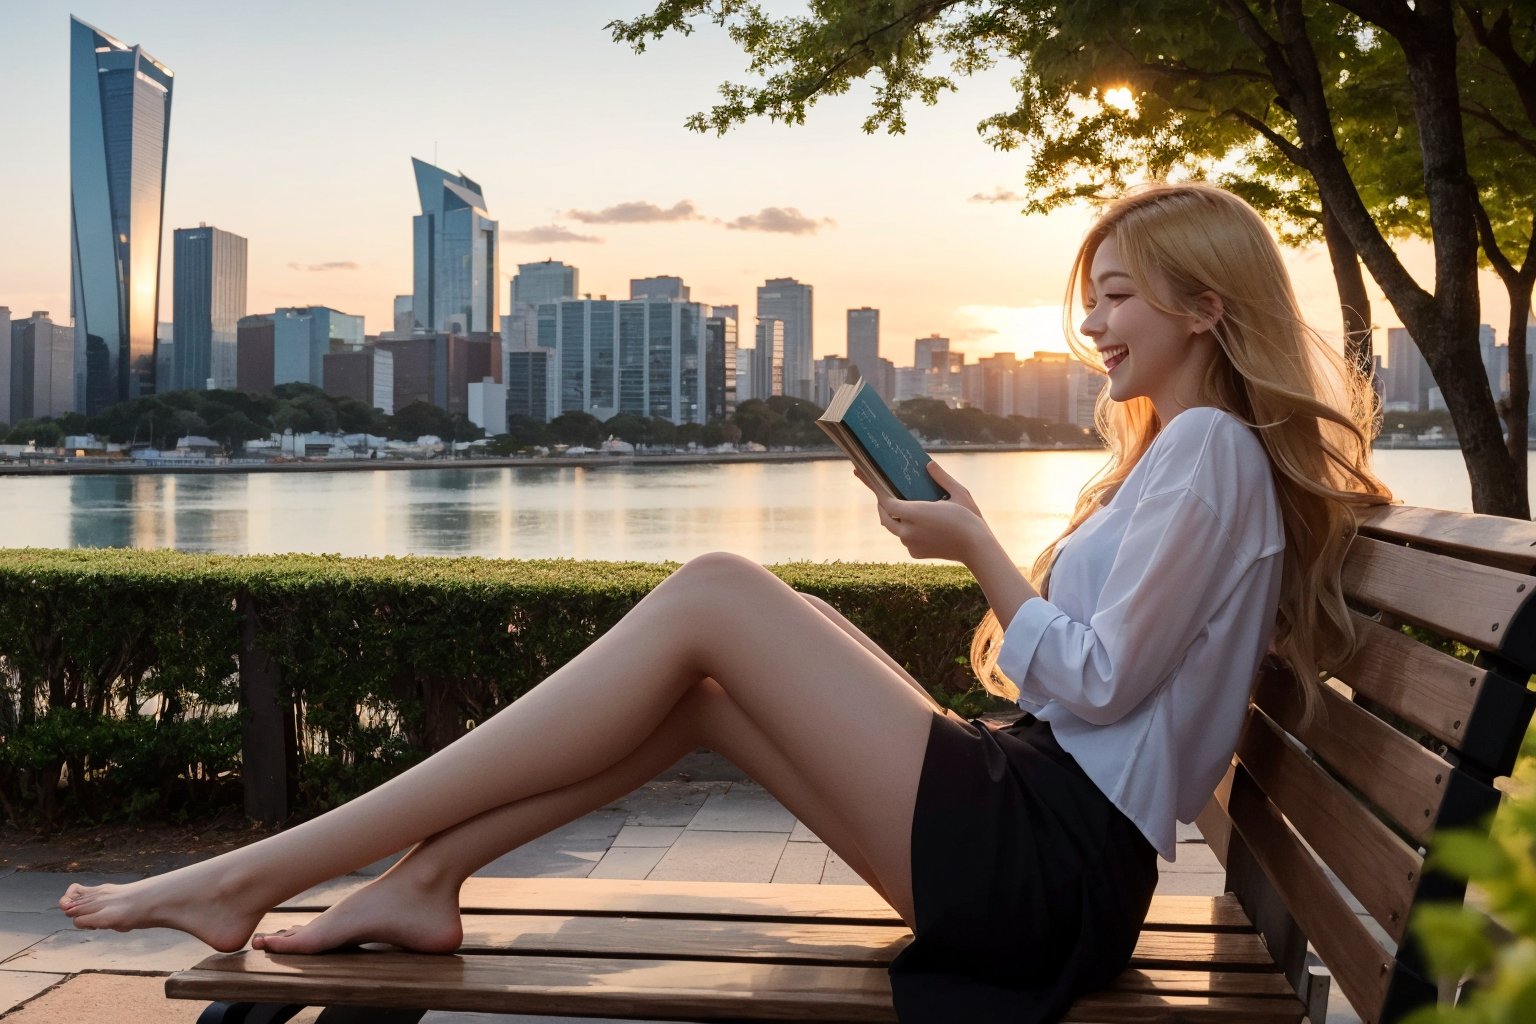 A stunning 23-year-old woman with piercing baby blue eyes and well-proportioned facial features poses against a cityscape backdrop, framed by sleek skyscrapers. Her consistent blonde long hair flows effortlessly, accentuating her flawless face under warm streetlights. In another scene, she walks barefoot on a sun-kissed beach at sunset, her flowing locks blowing gently in the ocean breeze. Next, she stands amidst lush forest foliage, her golden tresses entwining with branches as she gazes serenely into the distance. She lounges on a park bench, reads a book, and laughs with friends; confidently strides through a boardroom; playfully dances on a city street; leans in for a romantic kiss; takes a selfie with her phone; gets married; enjoys a night out at a bar; and reminisces about her childhood, all while maintaining her iconic blonde hair and adapting facial expressions to each setting.